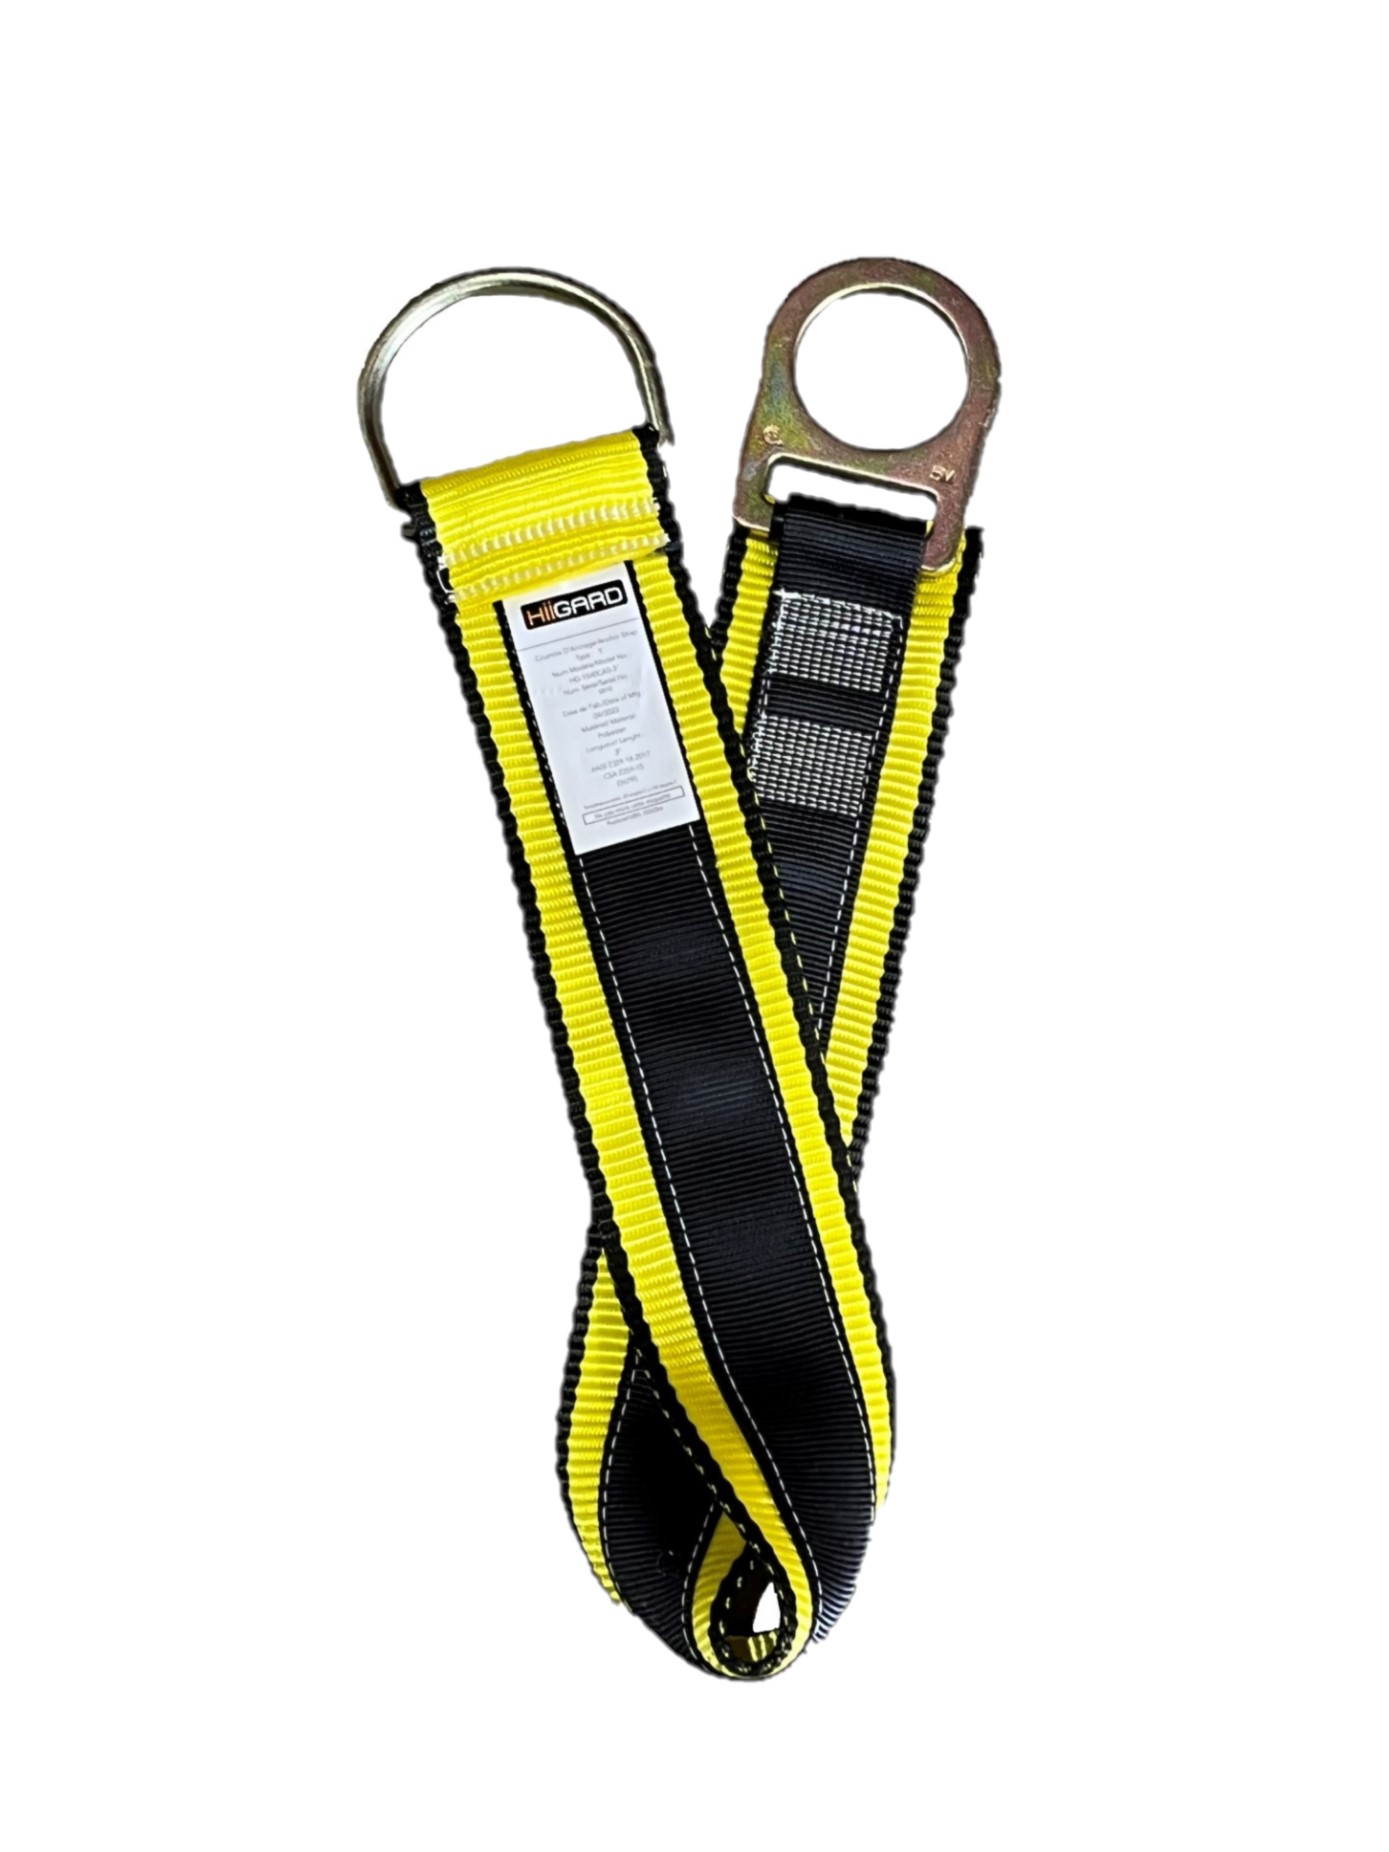 HiiGARD anchor strap with wear pad & dee ring on end - Sécurité Landry